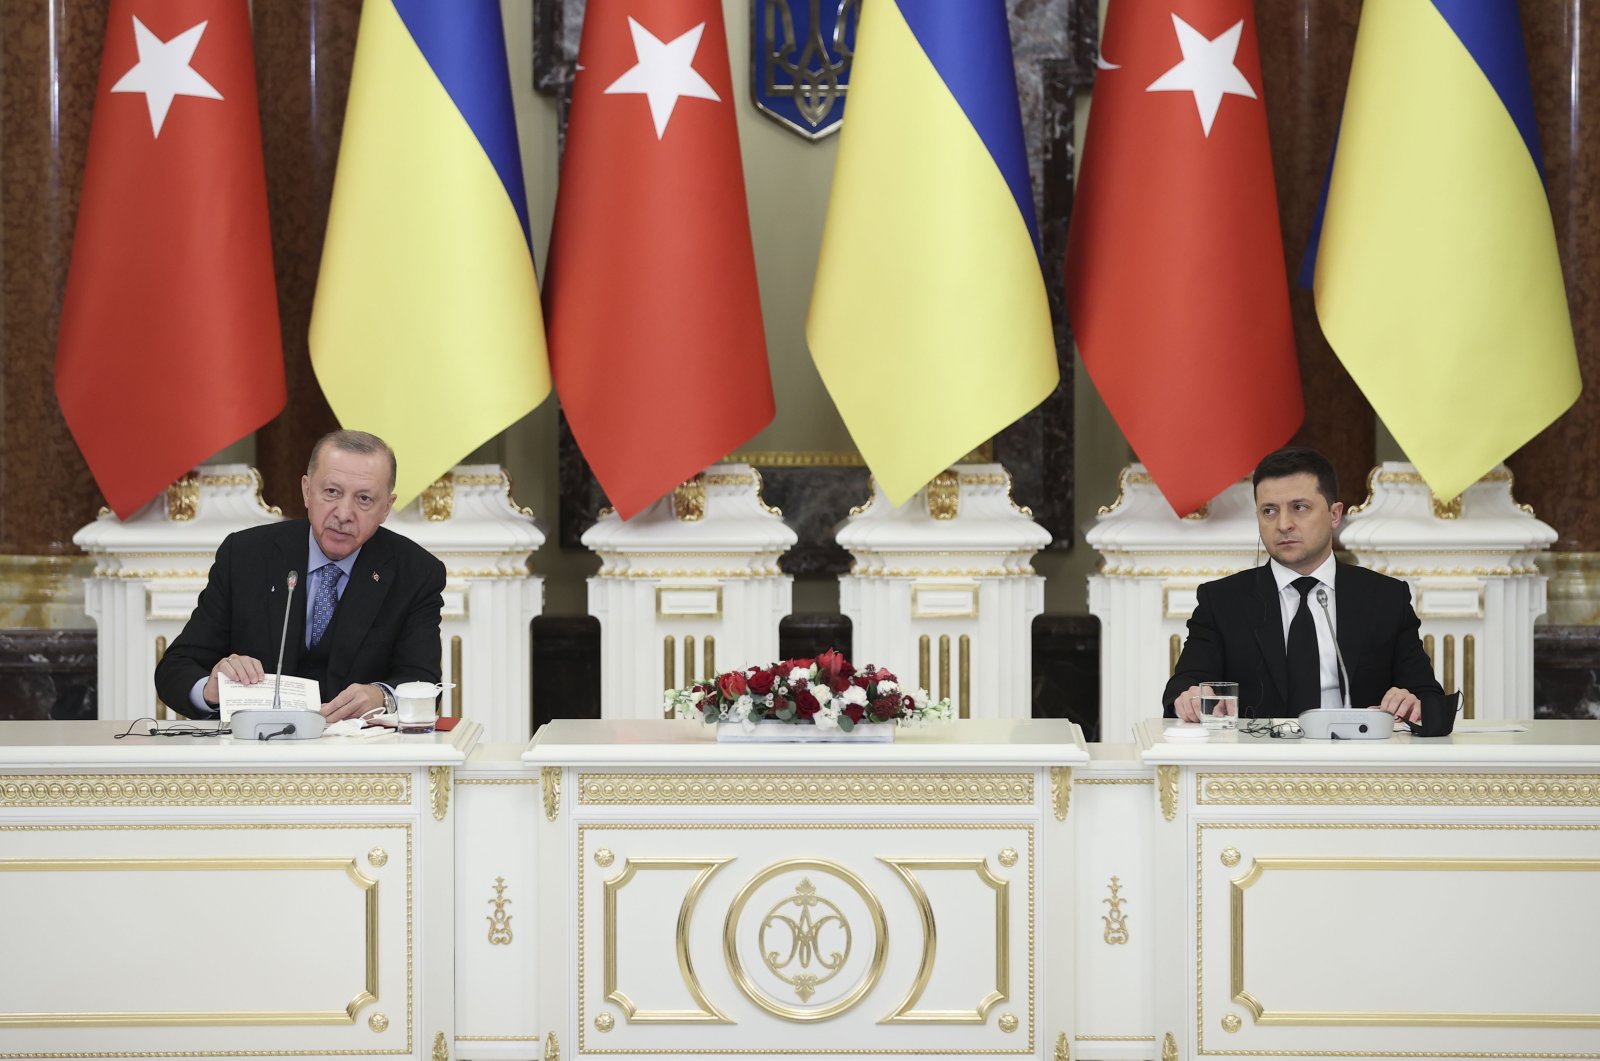 President Recep Tayyip Erdoğan (L) speaks at a joint news conference with his Ukrainian counterpart Volodymyr Zelenskyy. (AA File Photo)